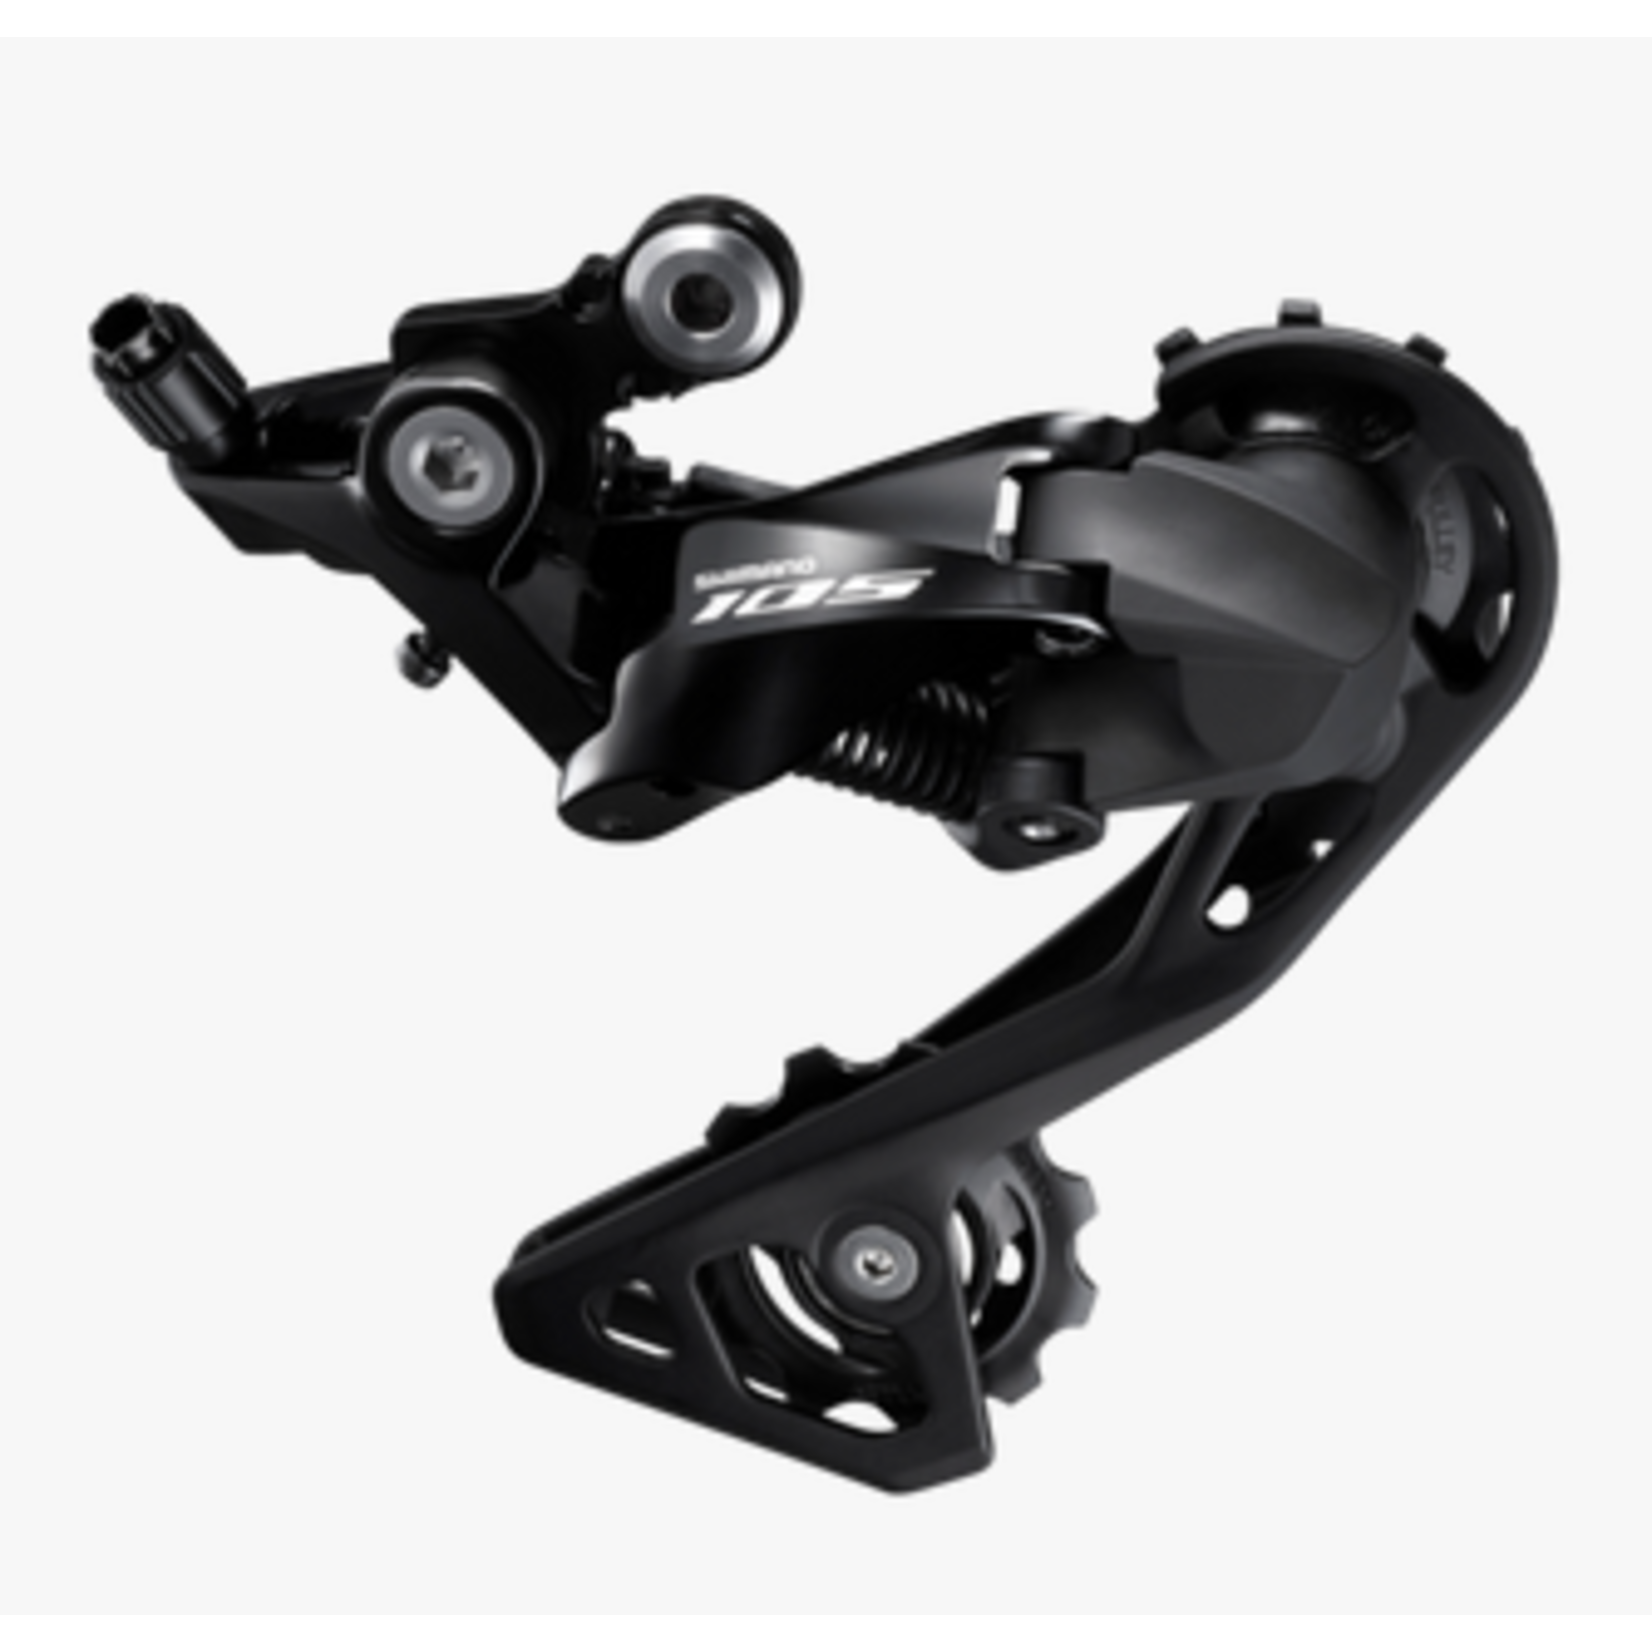 Shimano REAR DERAILLEUR, RD-R7000, 105, GS 11-SPEED, TOP NORMAL SHADOW DESIGN, DIRECT ATTACHMENT, W/OT-RS900(BLACK) 240MM X1, LONG NOSE CAP X1, BLACK, IND.PACK